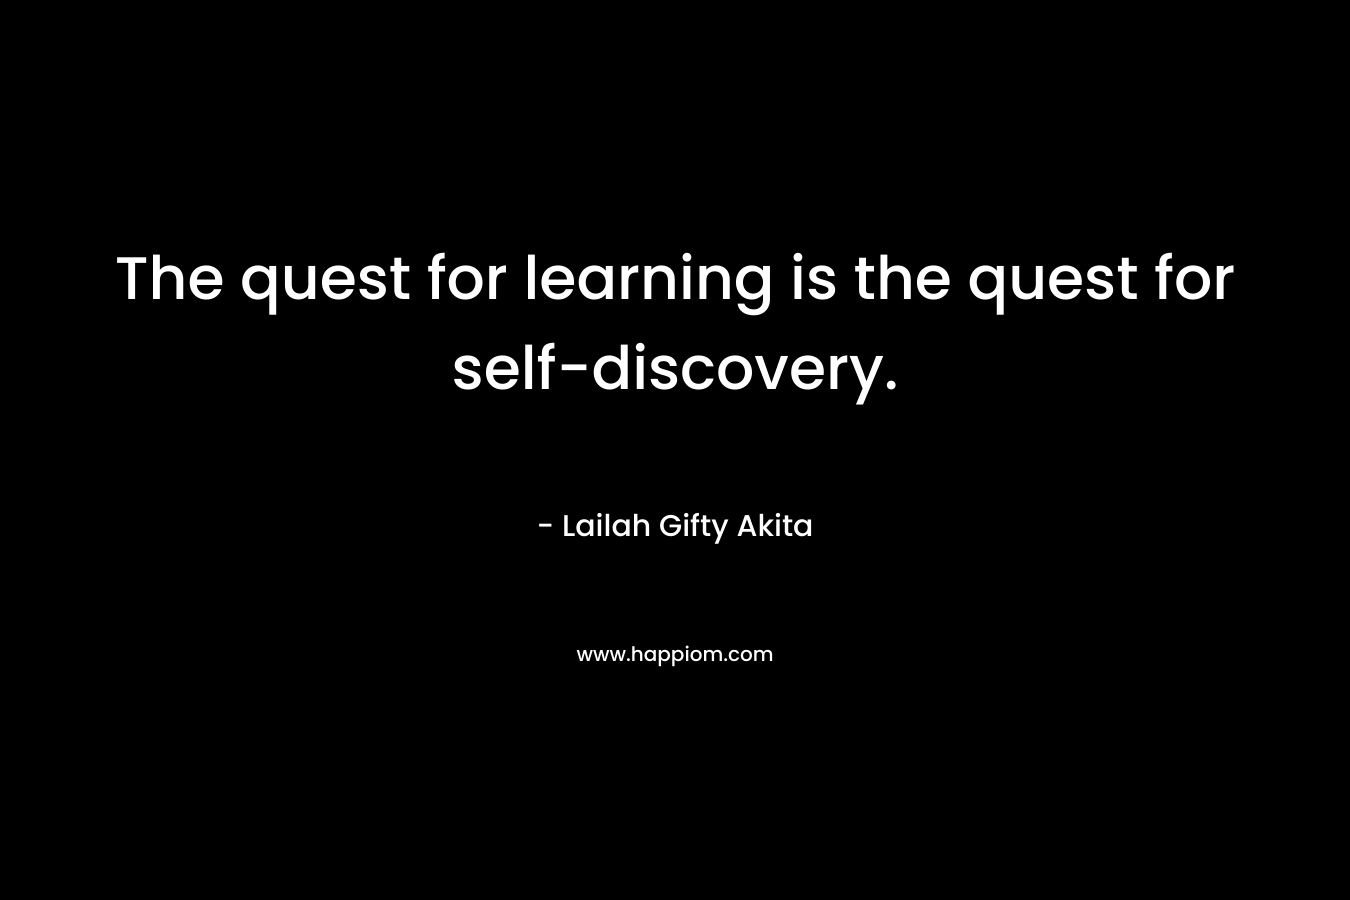 The quest for learning is the quest for self-discovery.